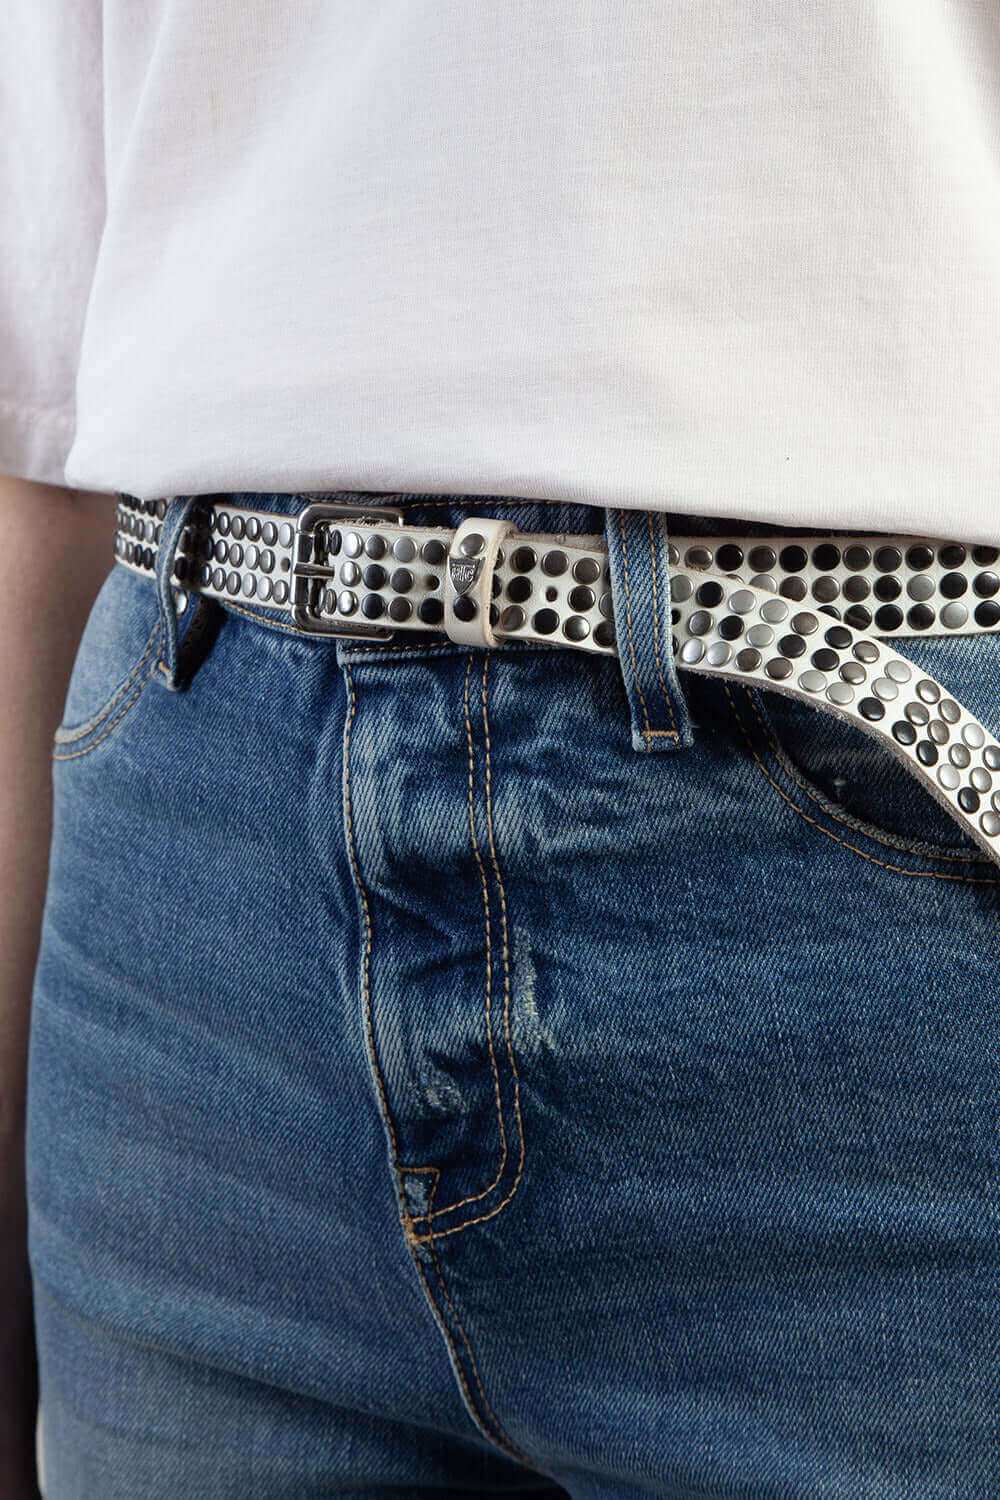 3.000 STUDS BELT White leather belt with studs, brass buckle, loop with studs and engraved logo. Height 2 cm. Made in Italy. HTC LOS ANGELES